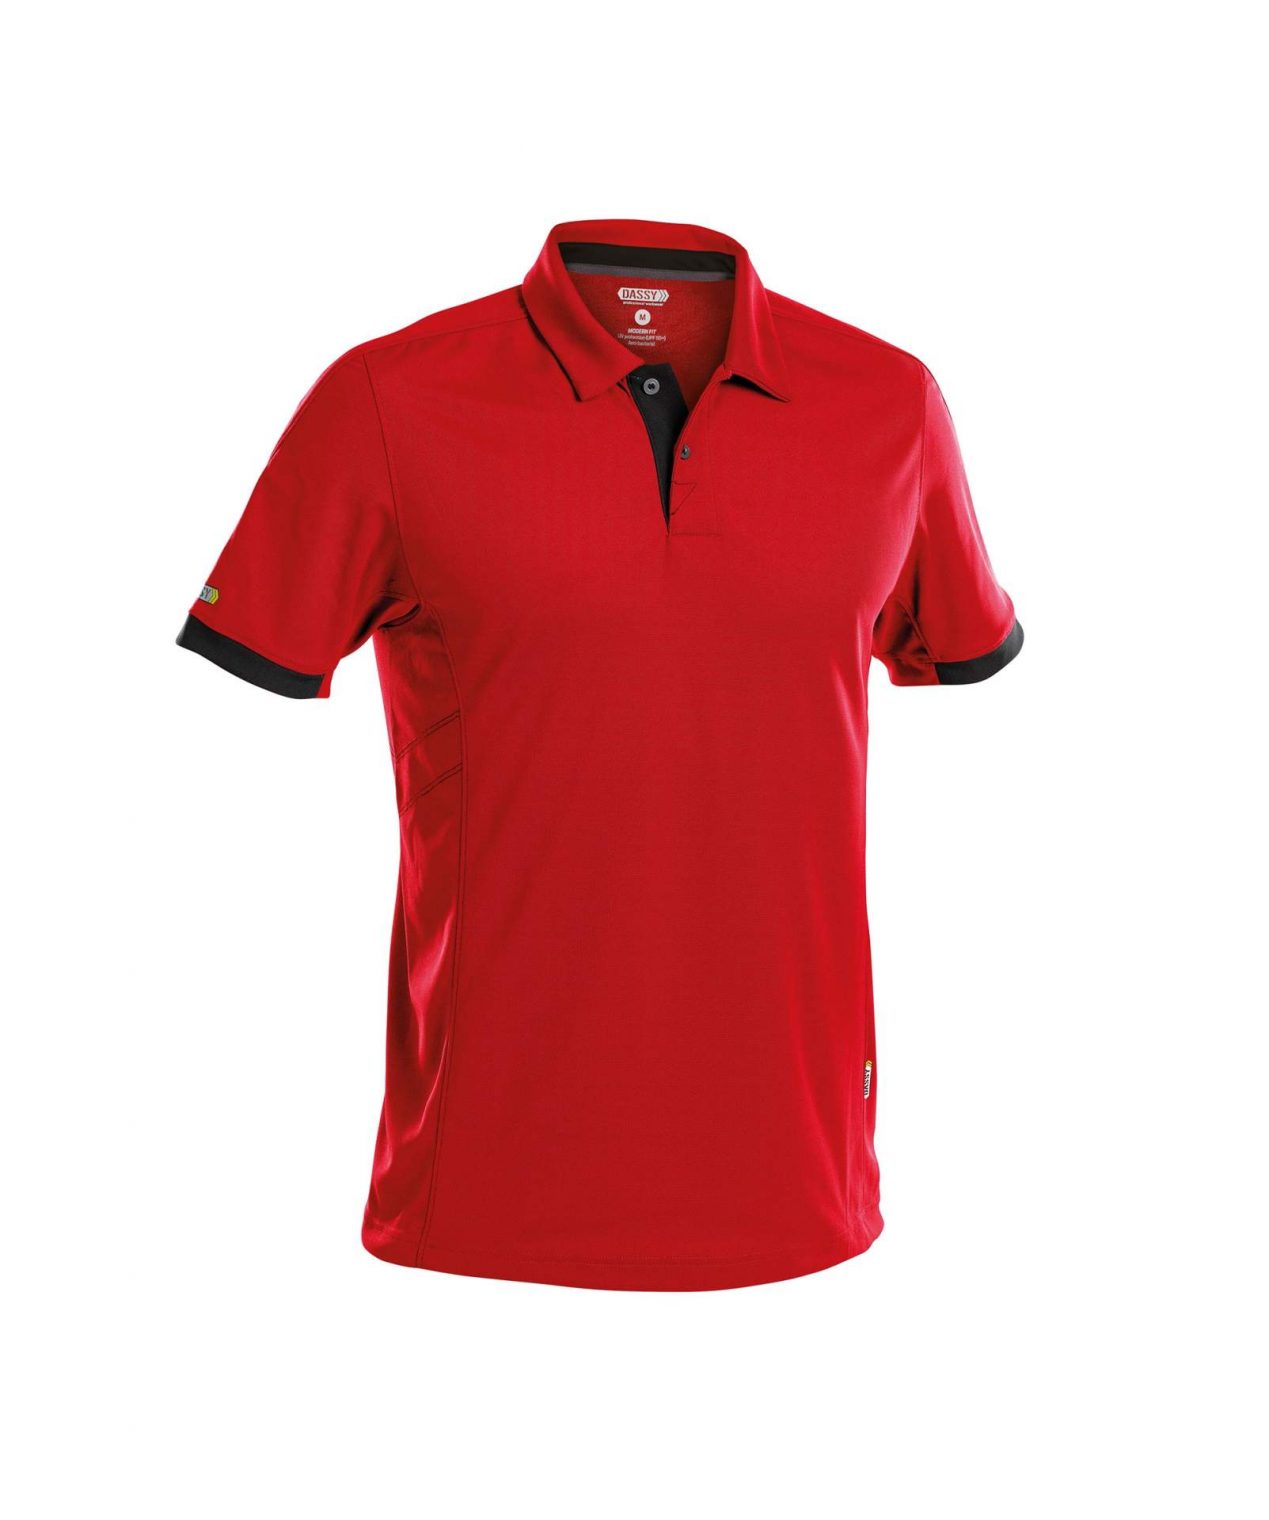 traxion polo shirt red black front